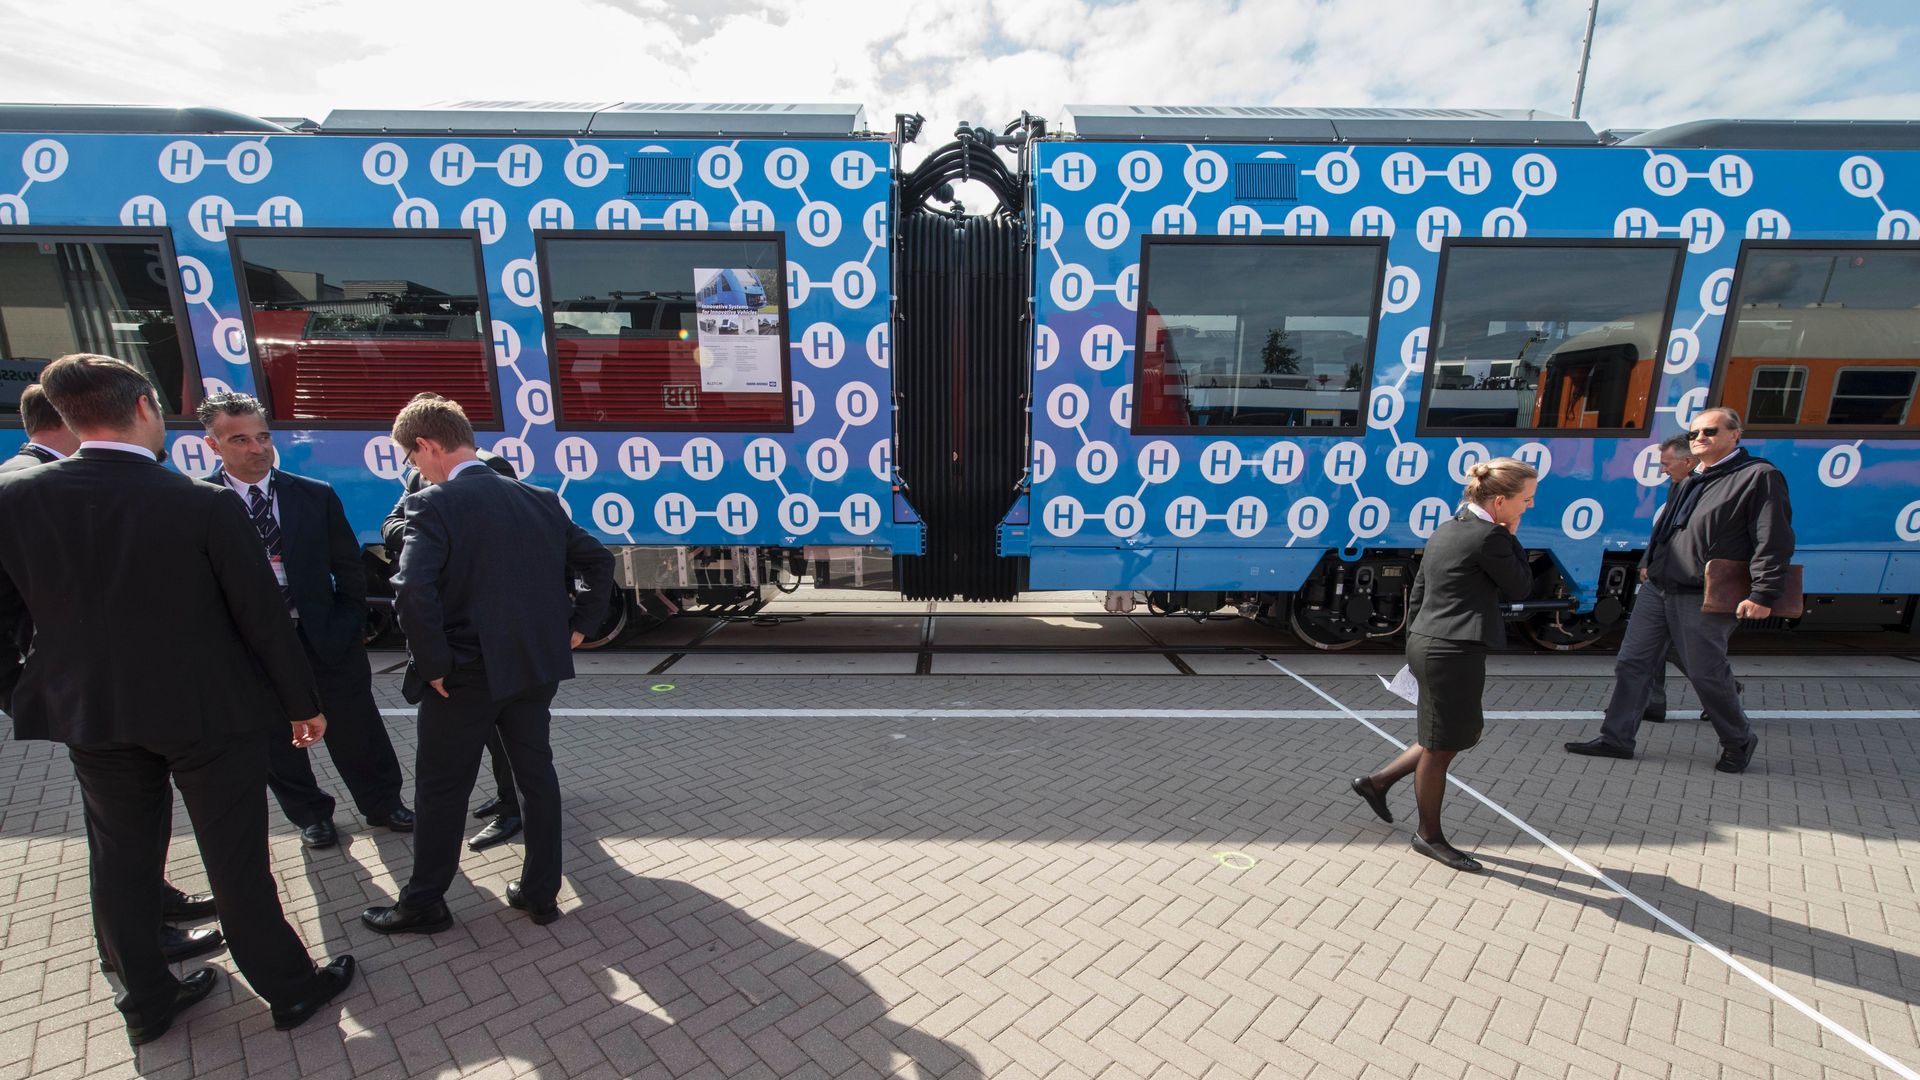 The Coradia iLint train, a CO2-emission-free regional train developed by French transport giant Alstom, is on display